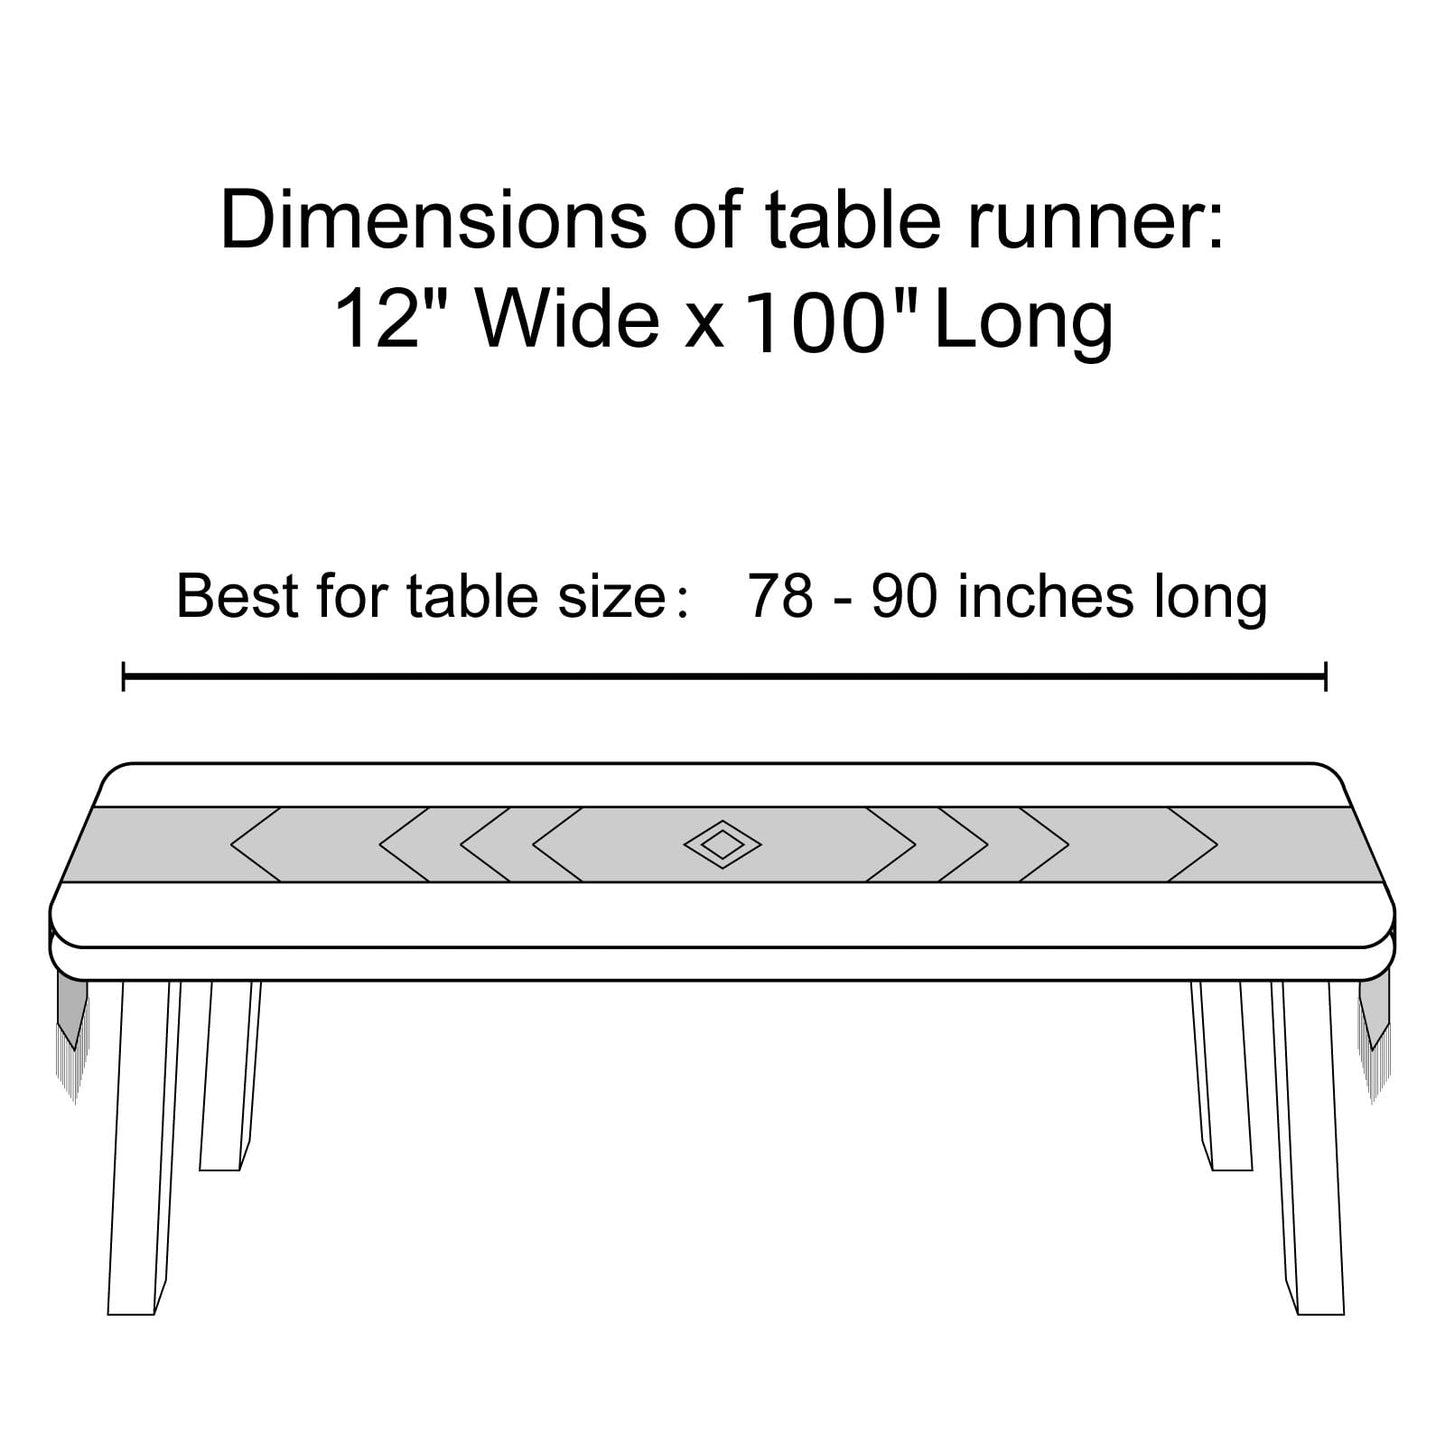 Dimensions of table runner